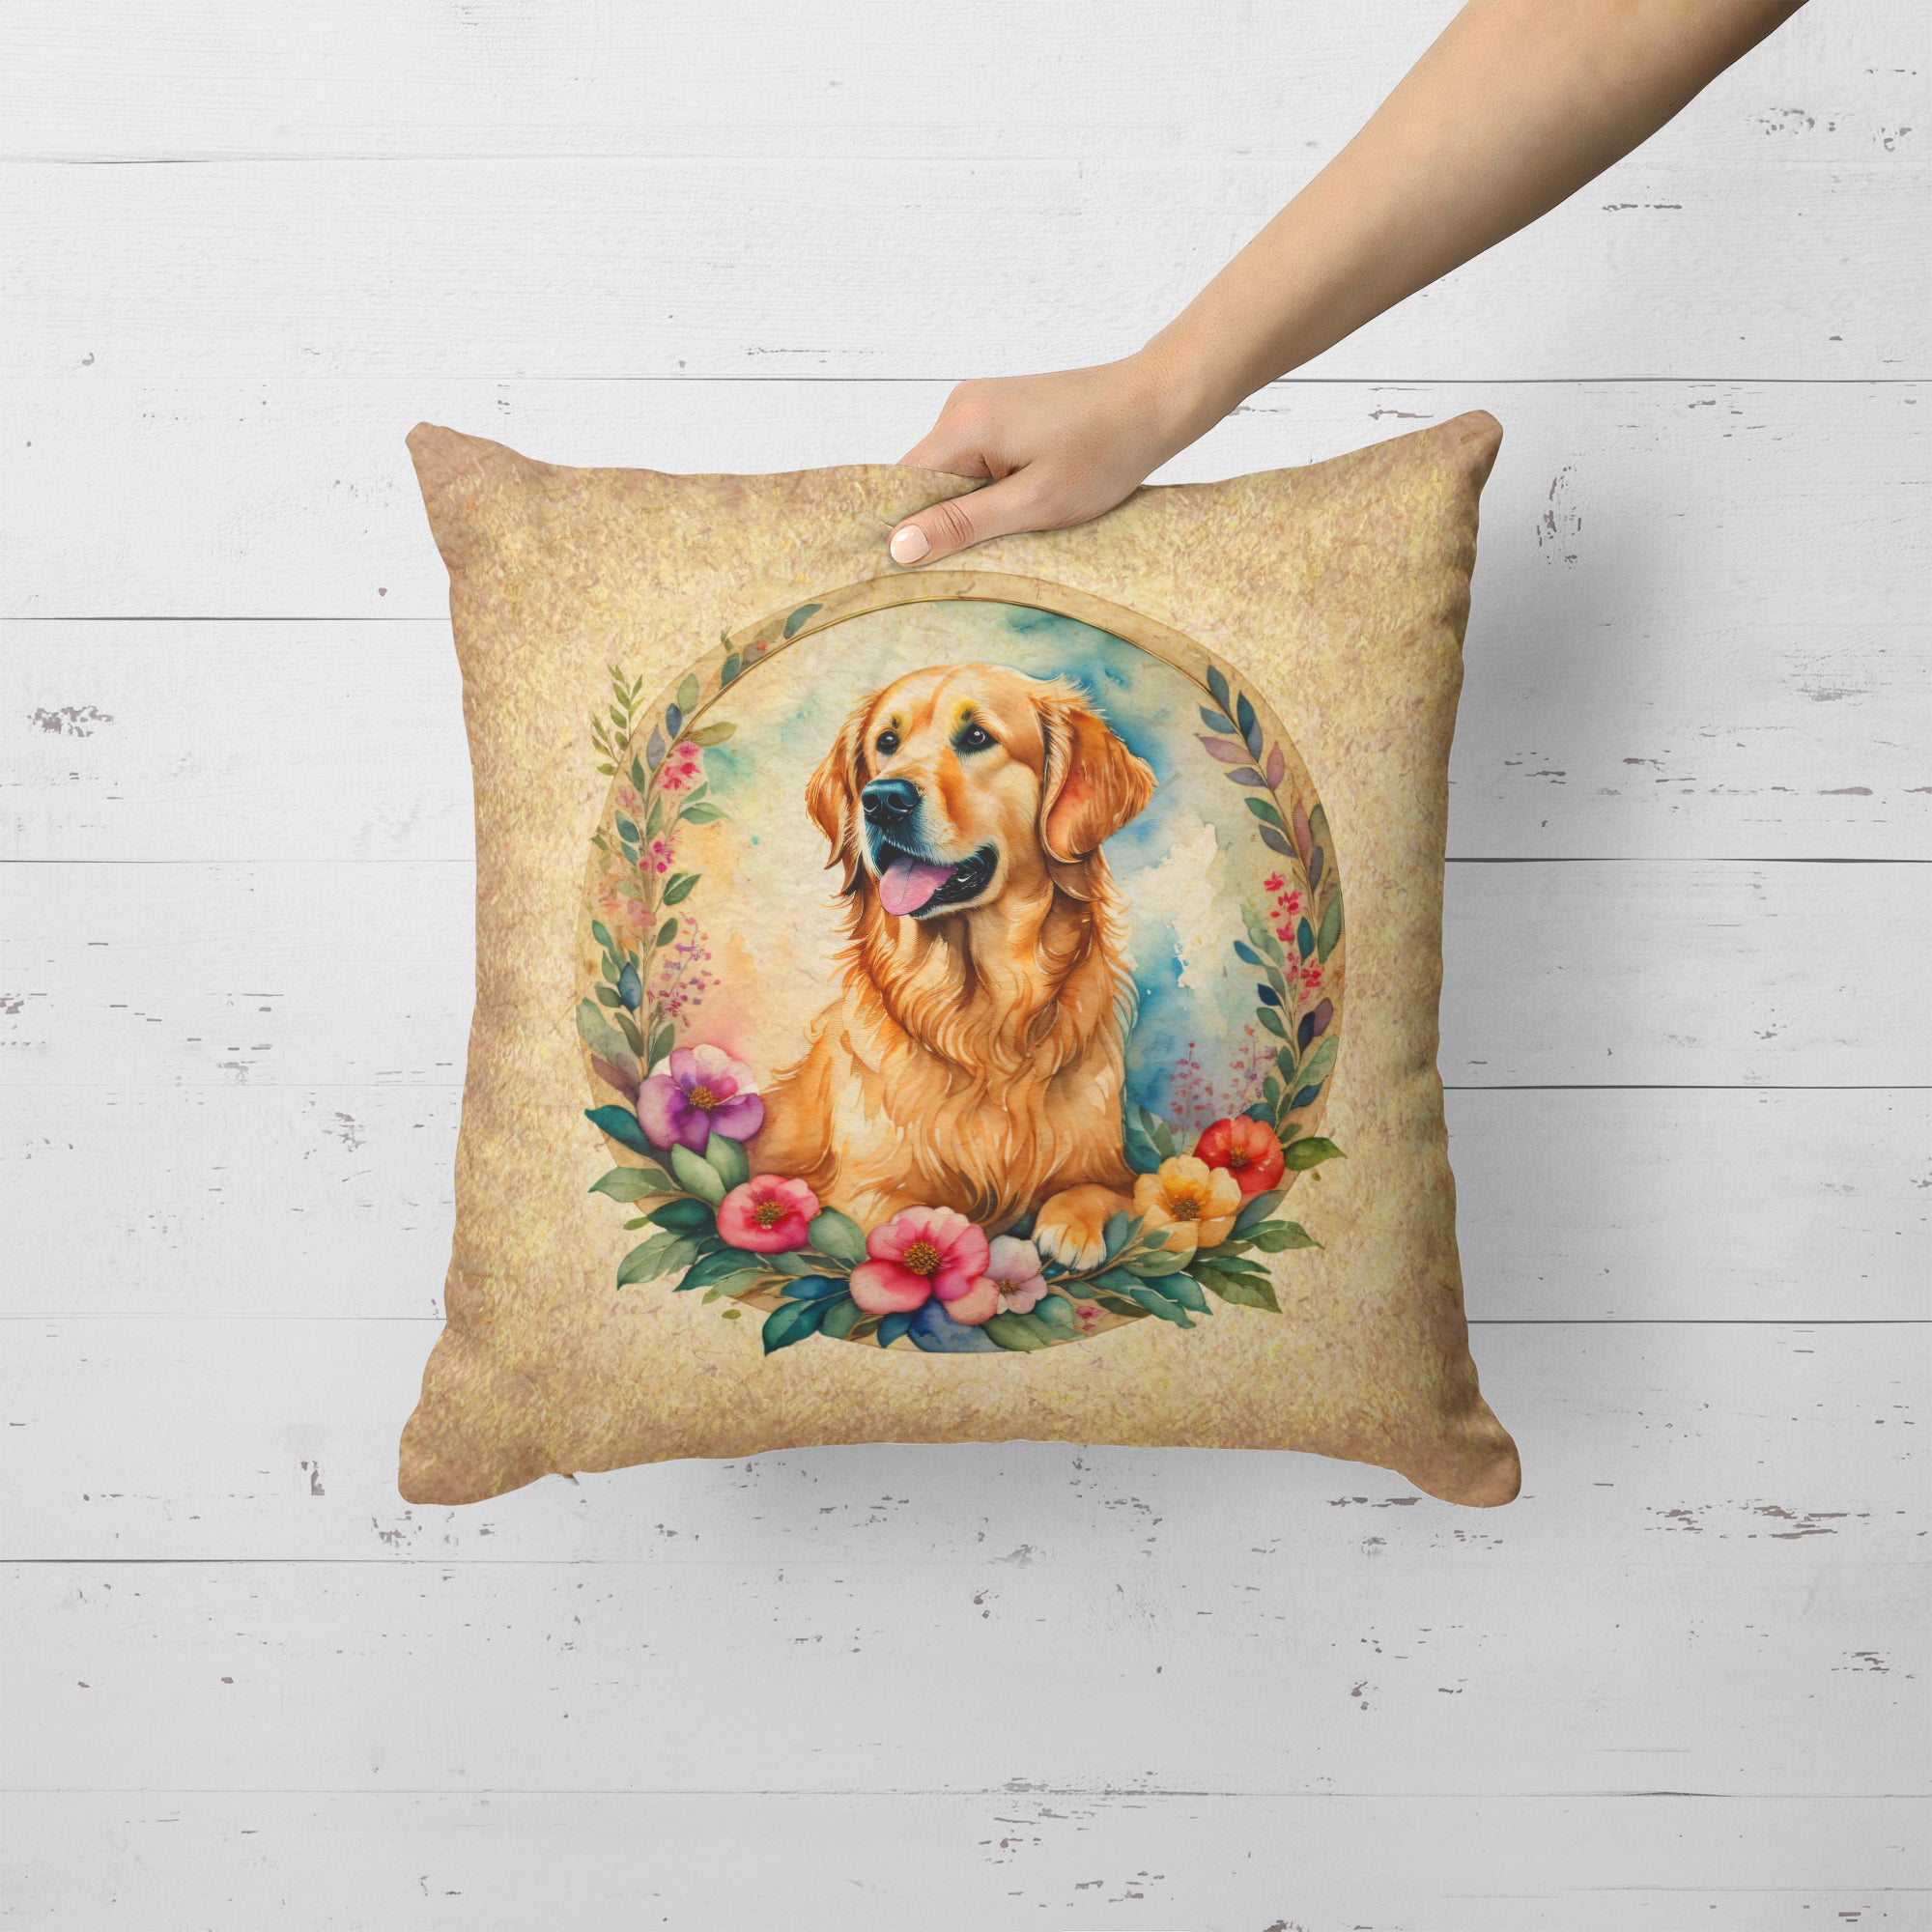 Buy this Golden Retriever and Flowers Fabric Decorative Pillow